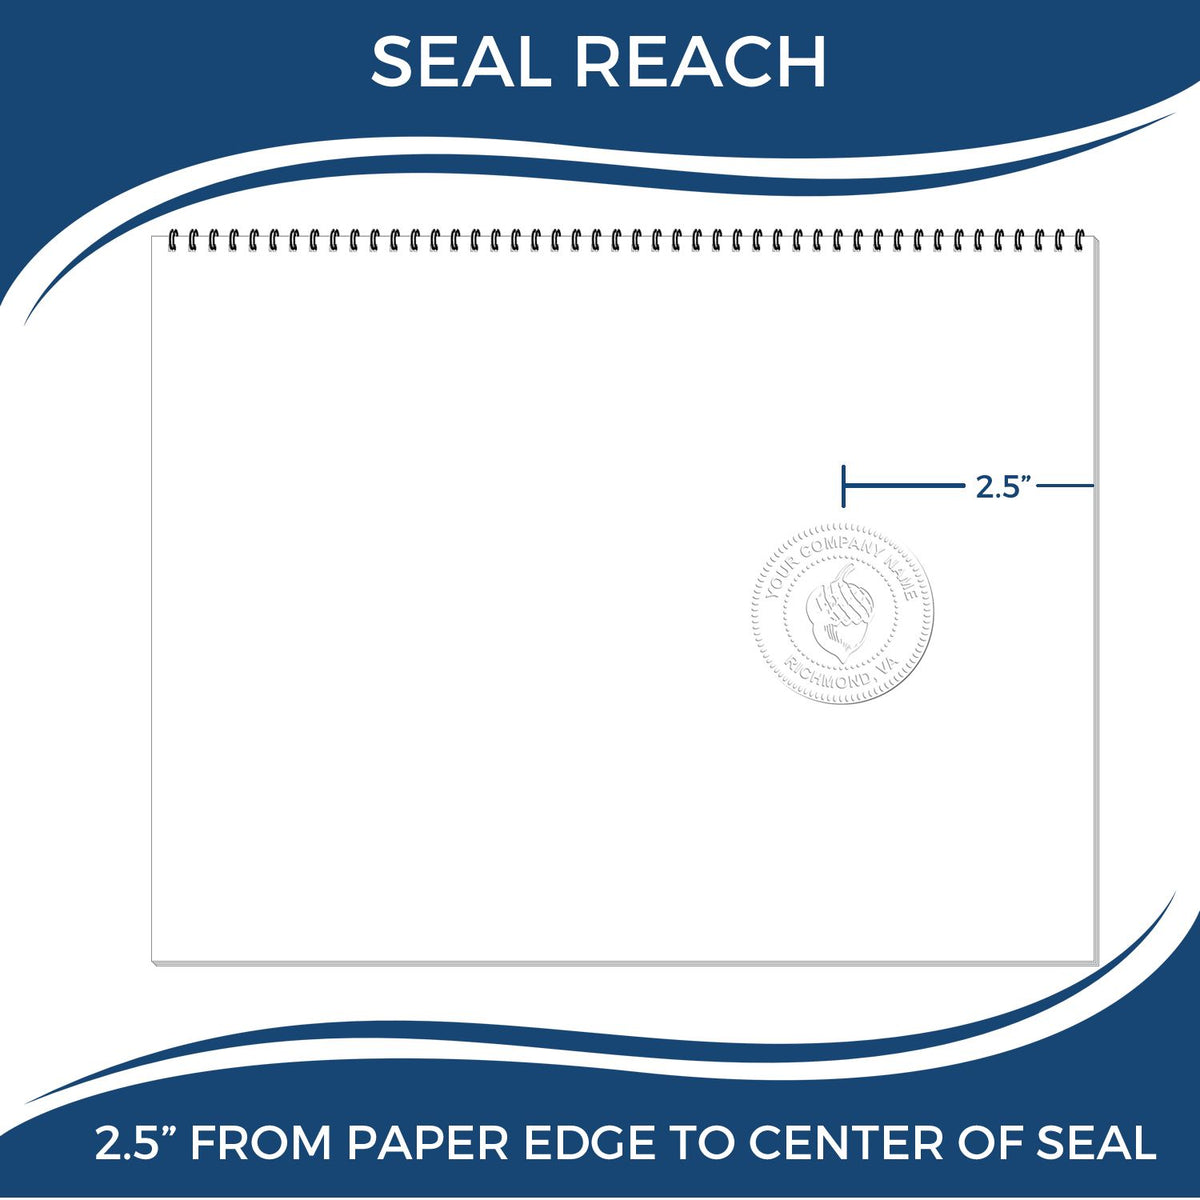 An infographic showing the seal reach which is represented by a ruler and a miniature seal image of the Long Reach California PE Seal